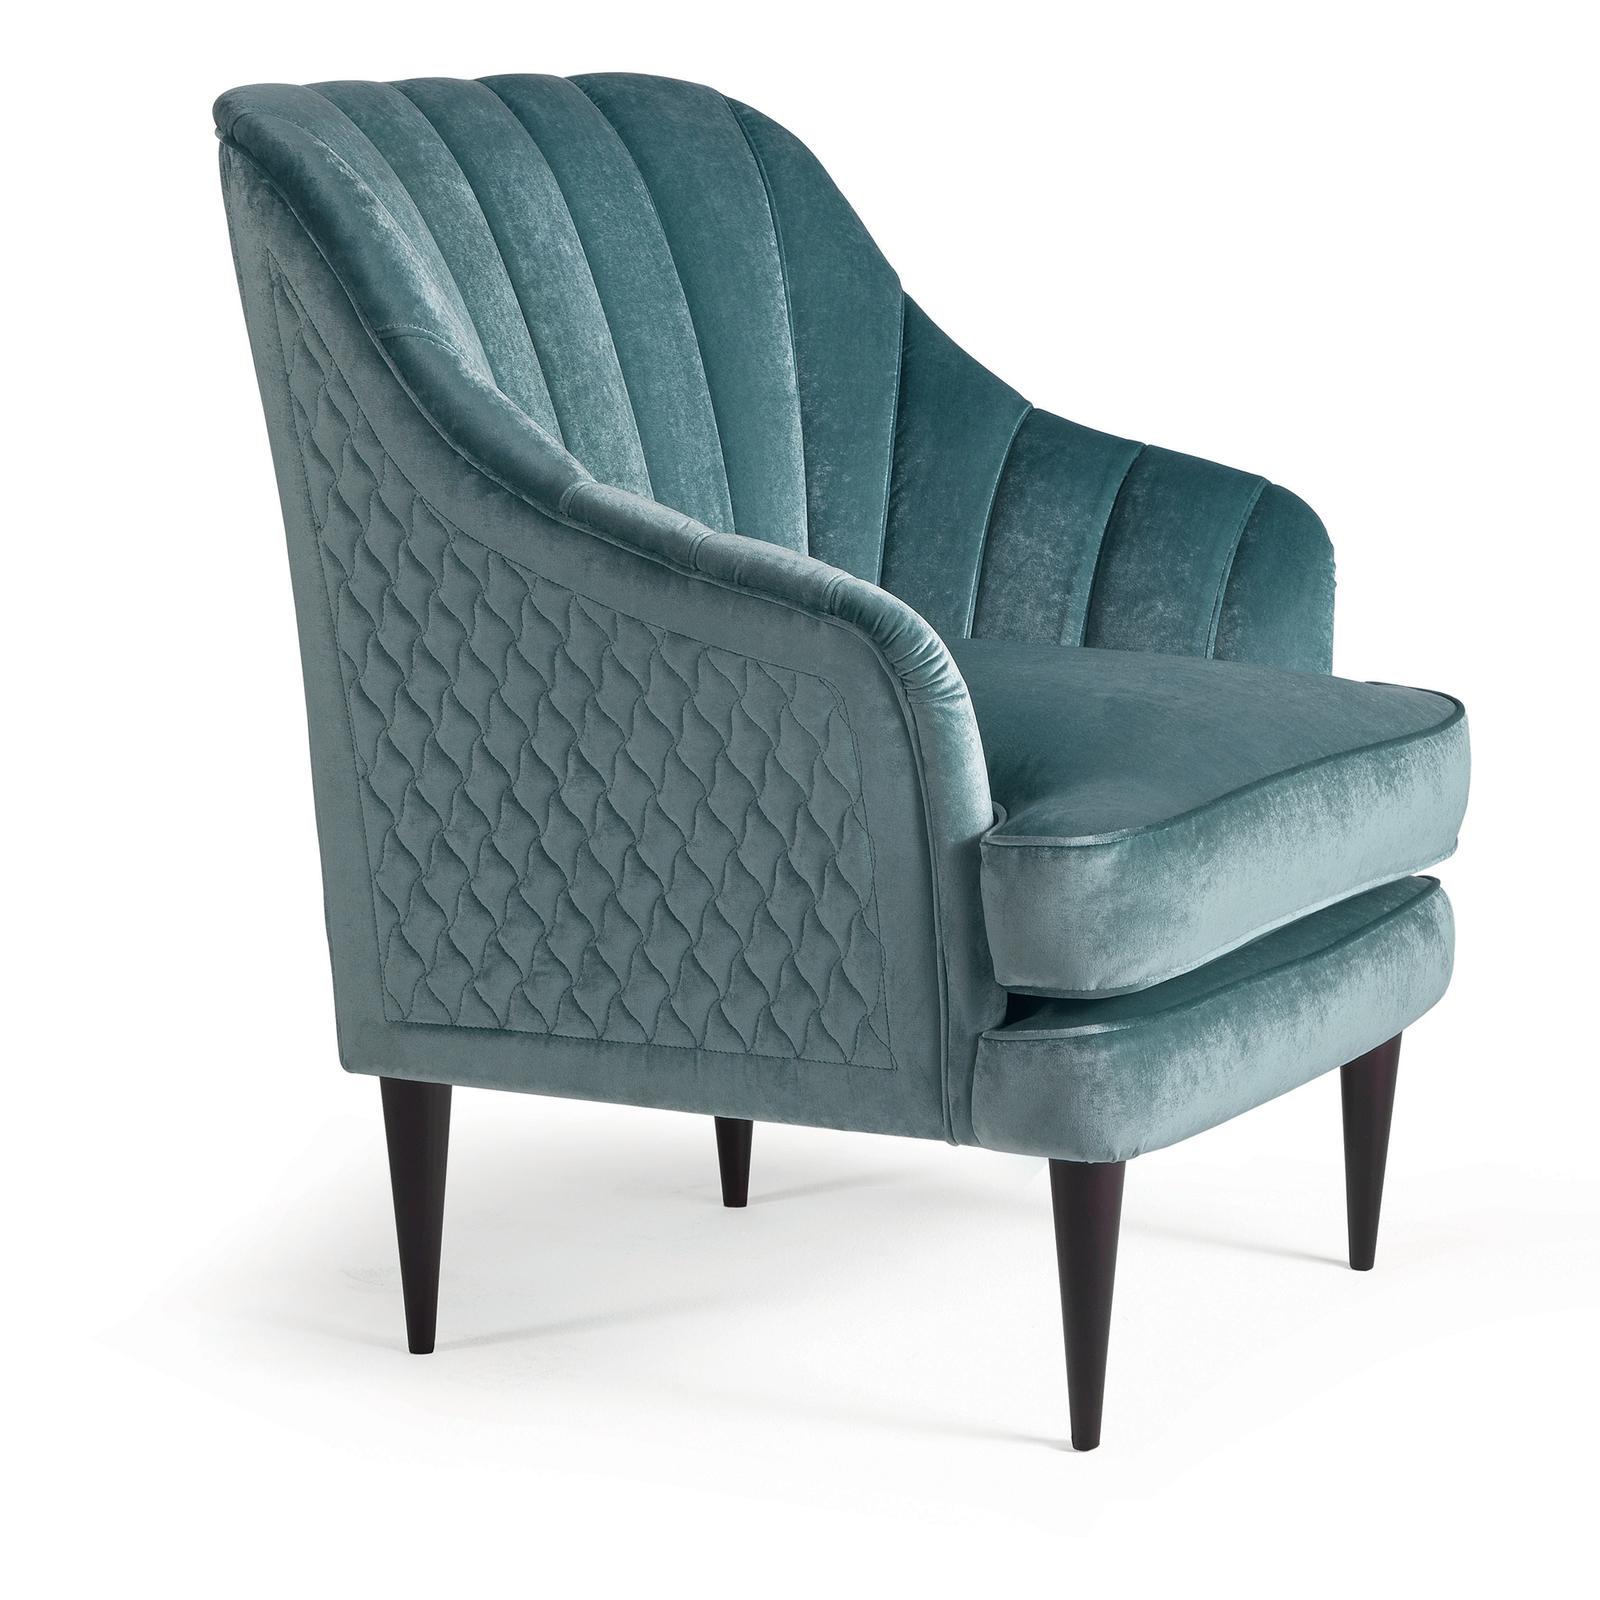 Marked by a sleek silhouette and bold upholstery, this armchair will add a touch of classic glamour to a traditional living room or private study decor. The sinuous lines of the Bergere-inspired frame, evident in the sloping arms, are upholstered in